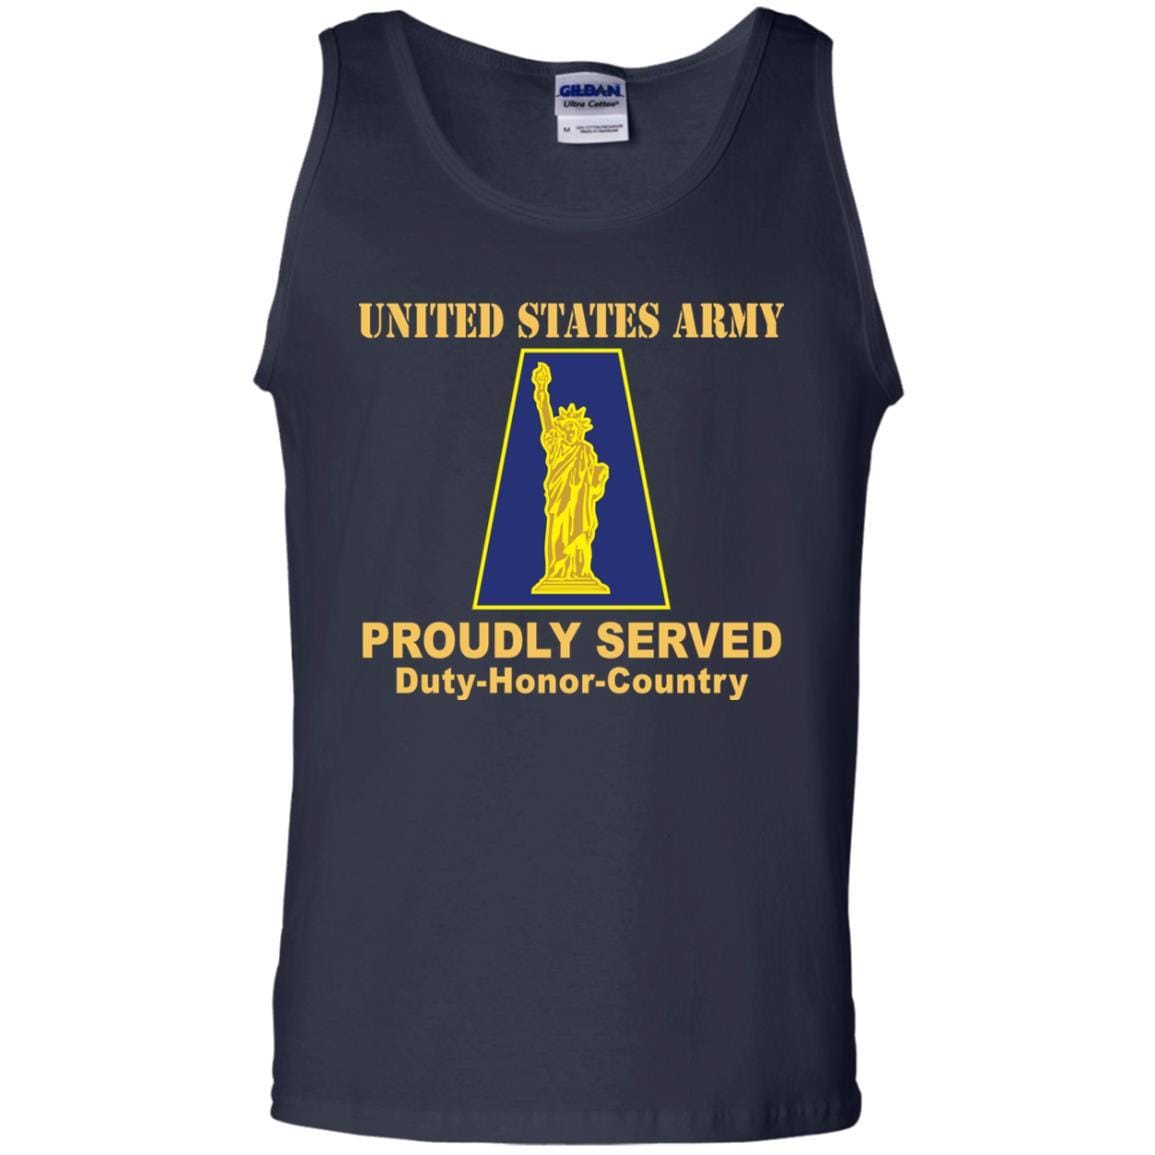 US ARMY 77TH SUSTAINMENT BRIGADE - Proudly Served T-Shirt On Front For Men-TShirt-Army-Veterans Nation